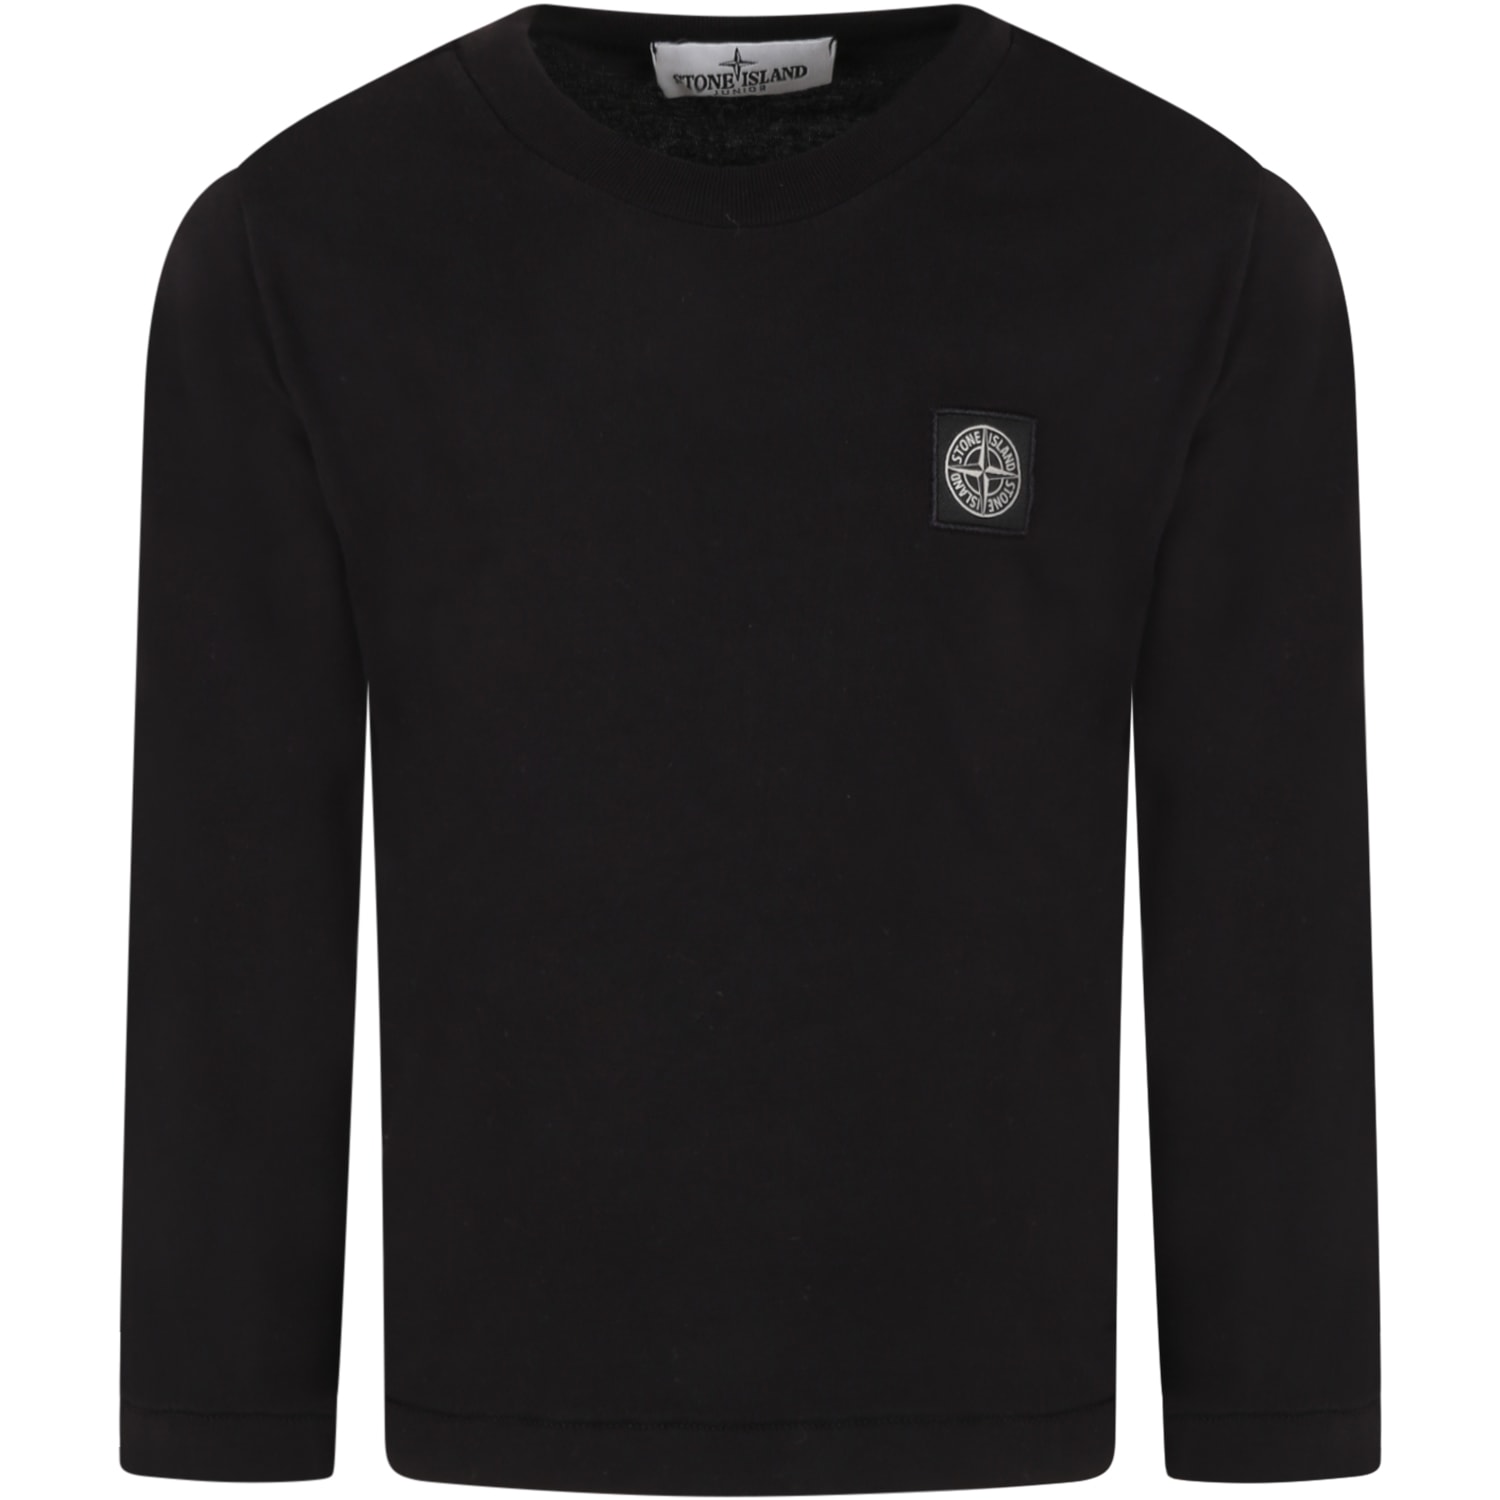 Stone Island Junior Black T-shirt For Boy With Iconic Compass